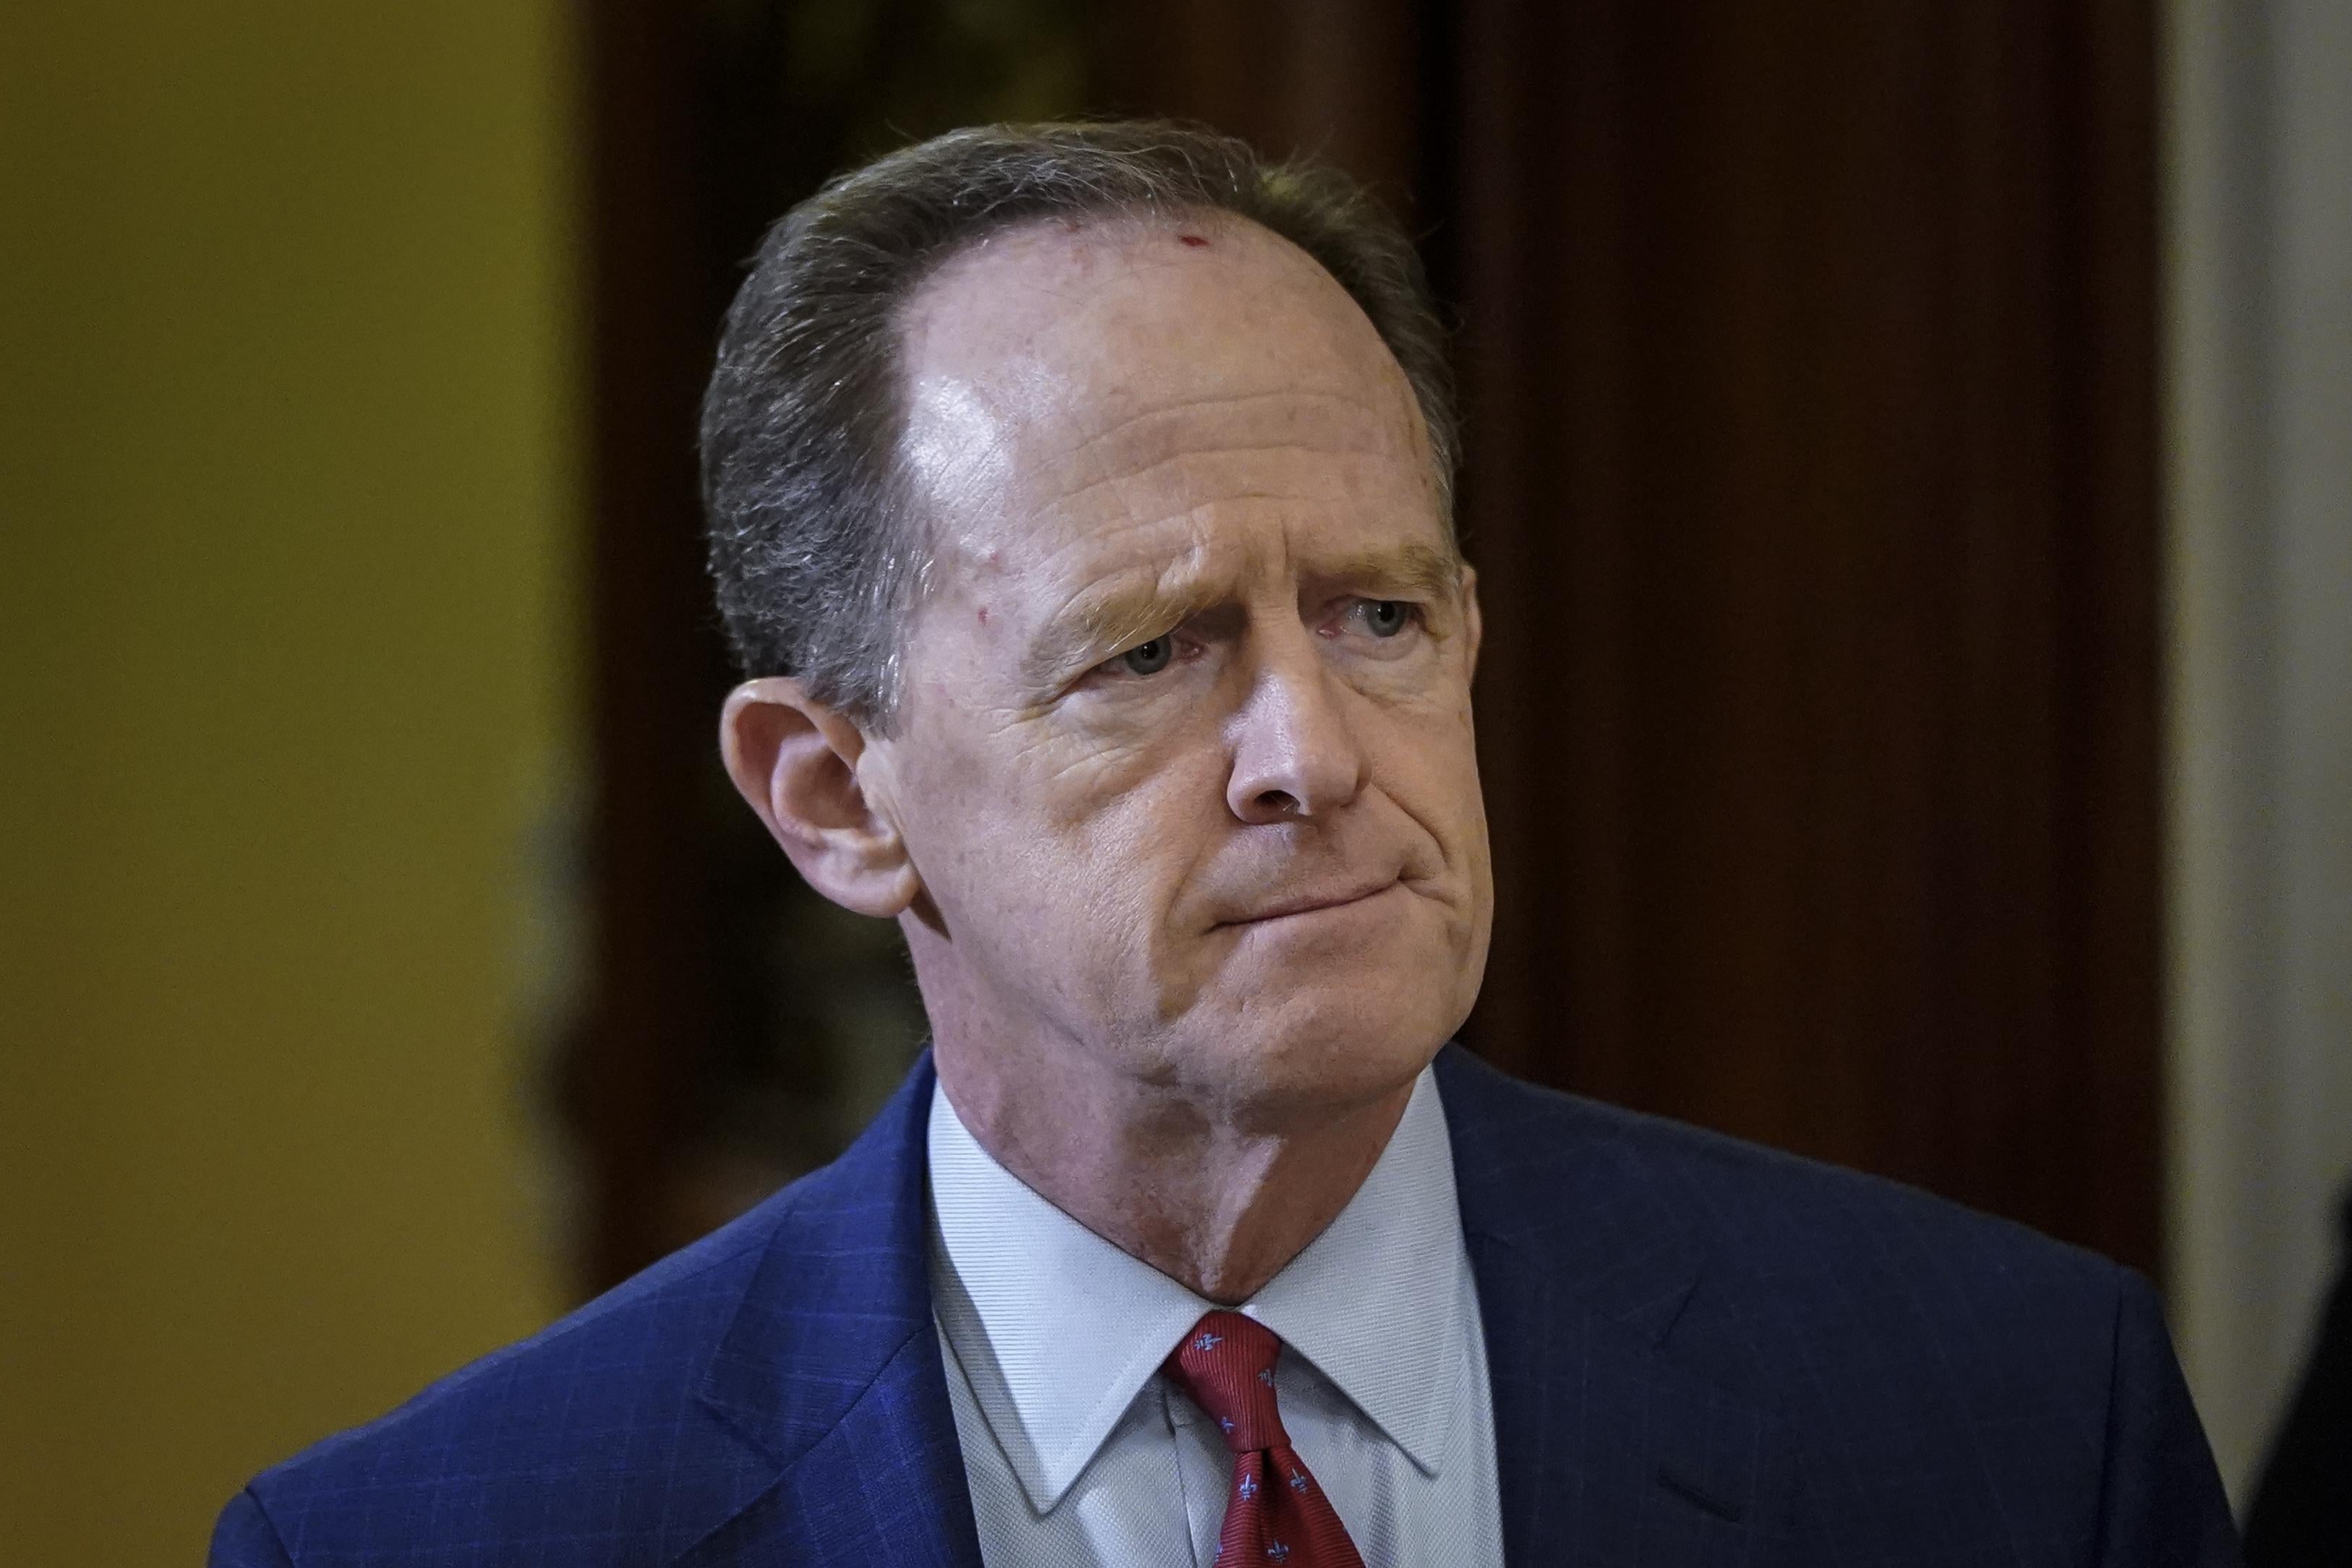 Sen. Pat Toomey (R-PA) leaves the Senate chamber during a recess at the U.S. Capitol on January 30, 2020 in Washington, D.C.